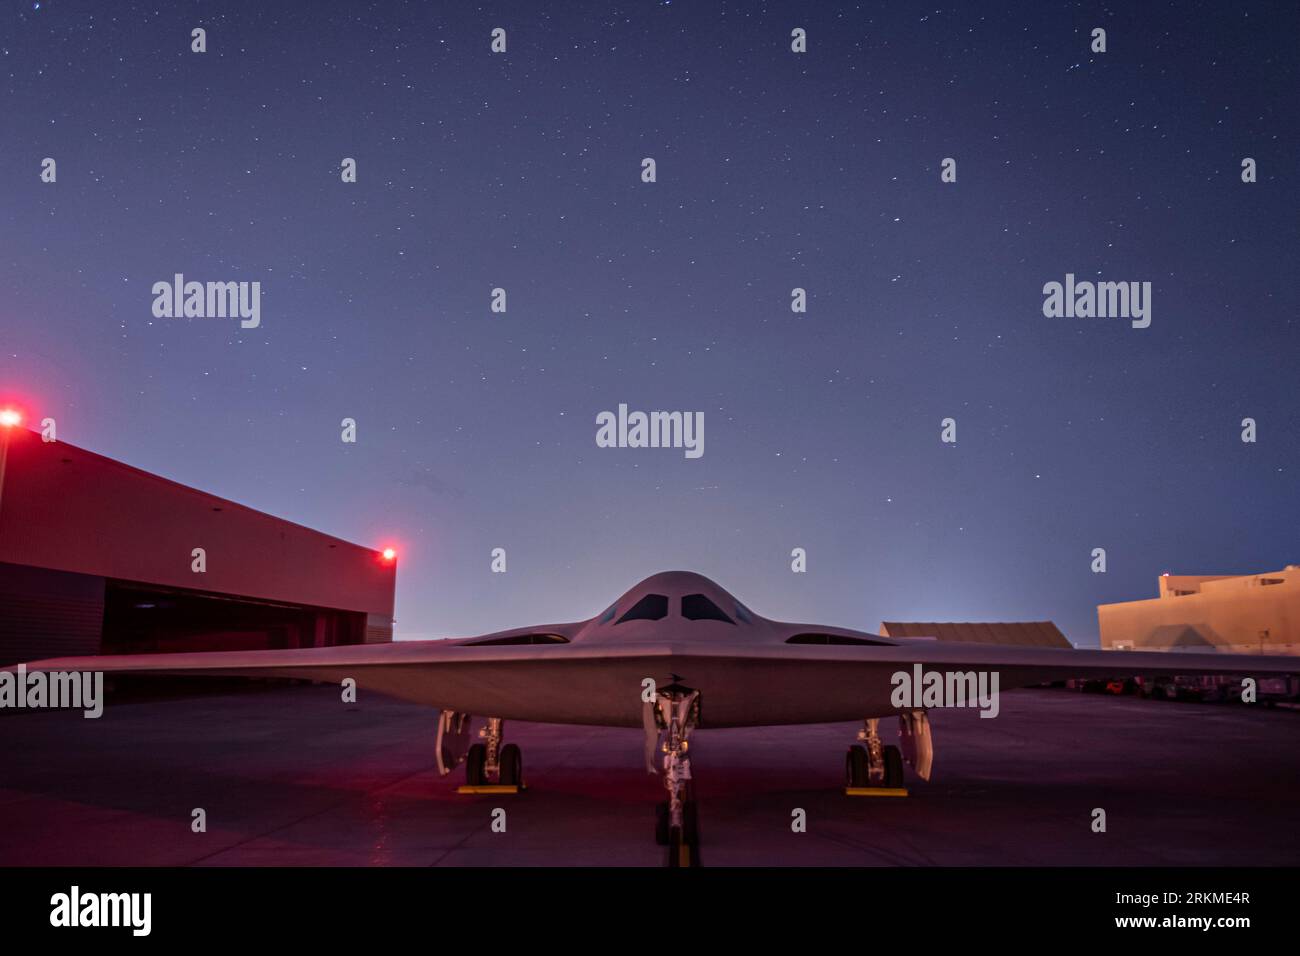 Palmdale, United States. 29 November, 2022. The U.S. Air Force B-21 Raider stealth strategic bomber aircraft under the night sky at Plant 42 on Edwards Air Force Base, November 29, 2022 in Palmdale, California.  Credit: USAF/U.S. Air Force Photo/Alamy Live News Stock Photo